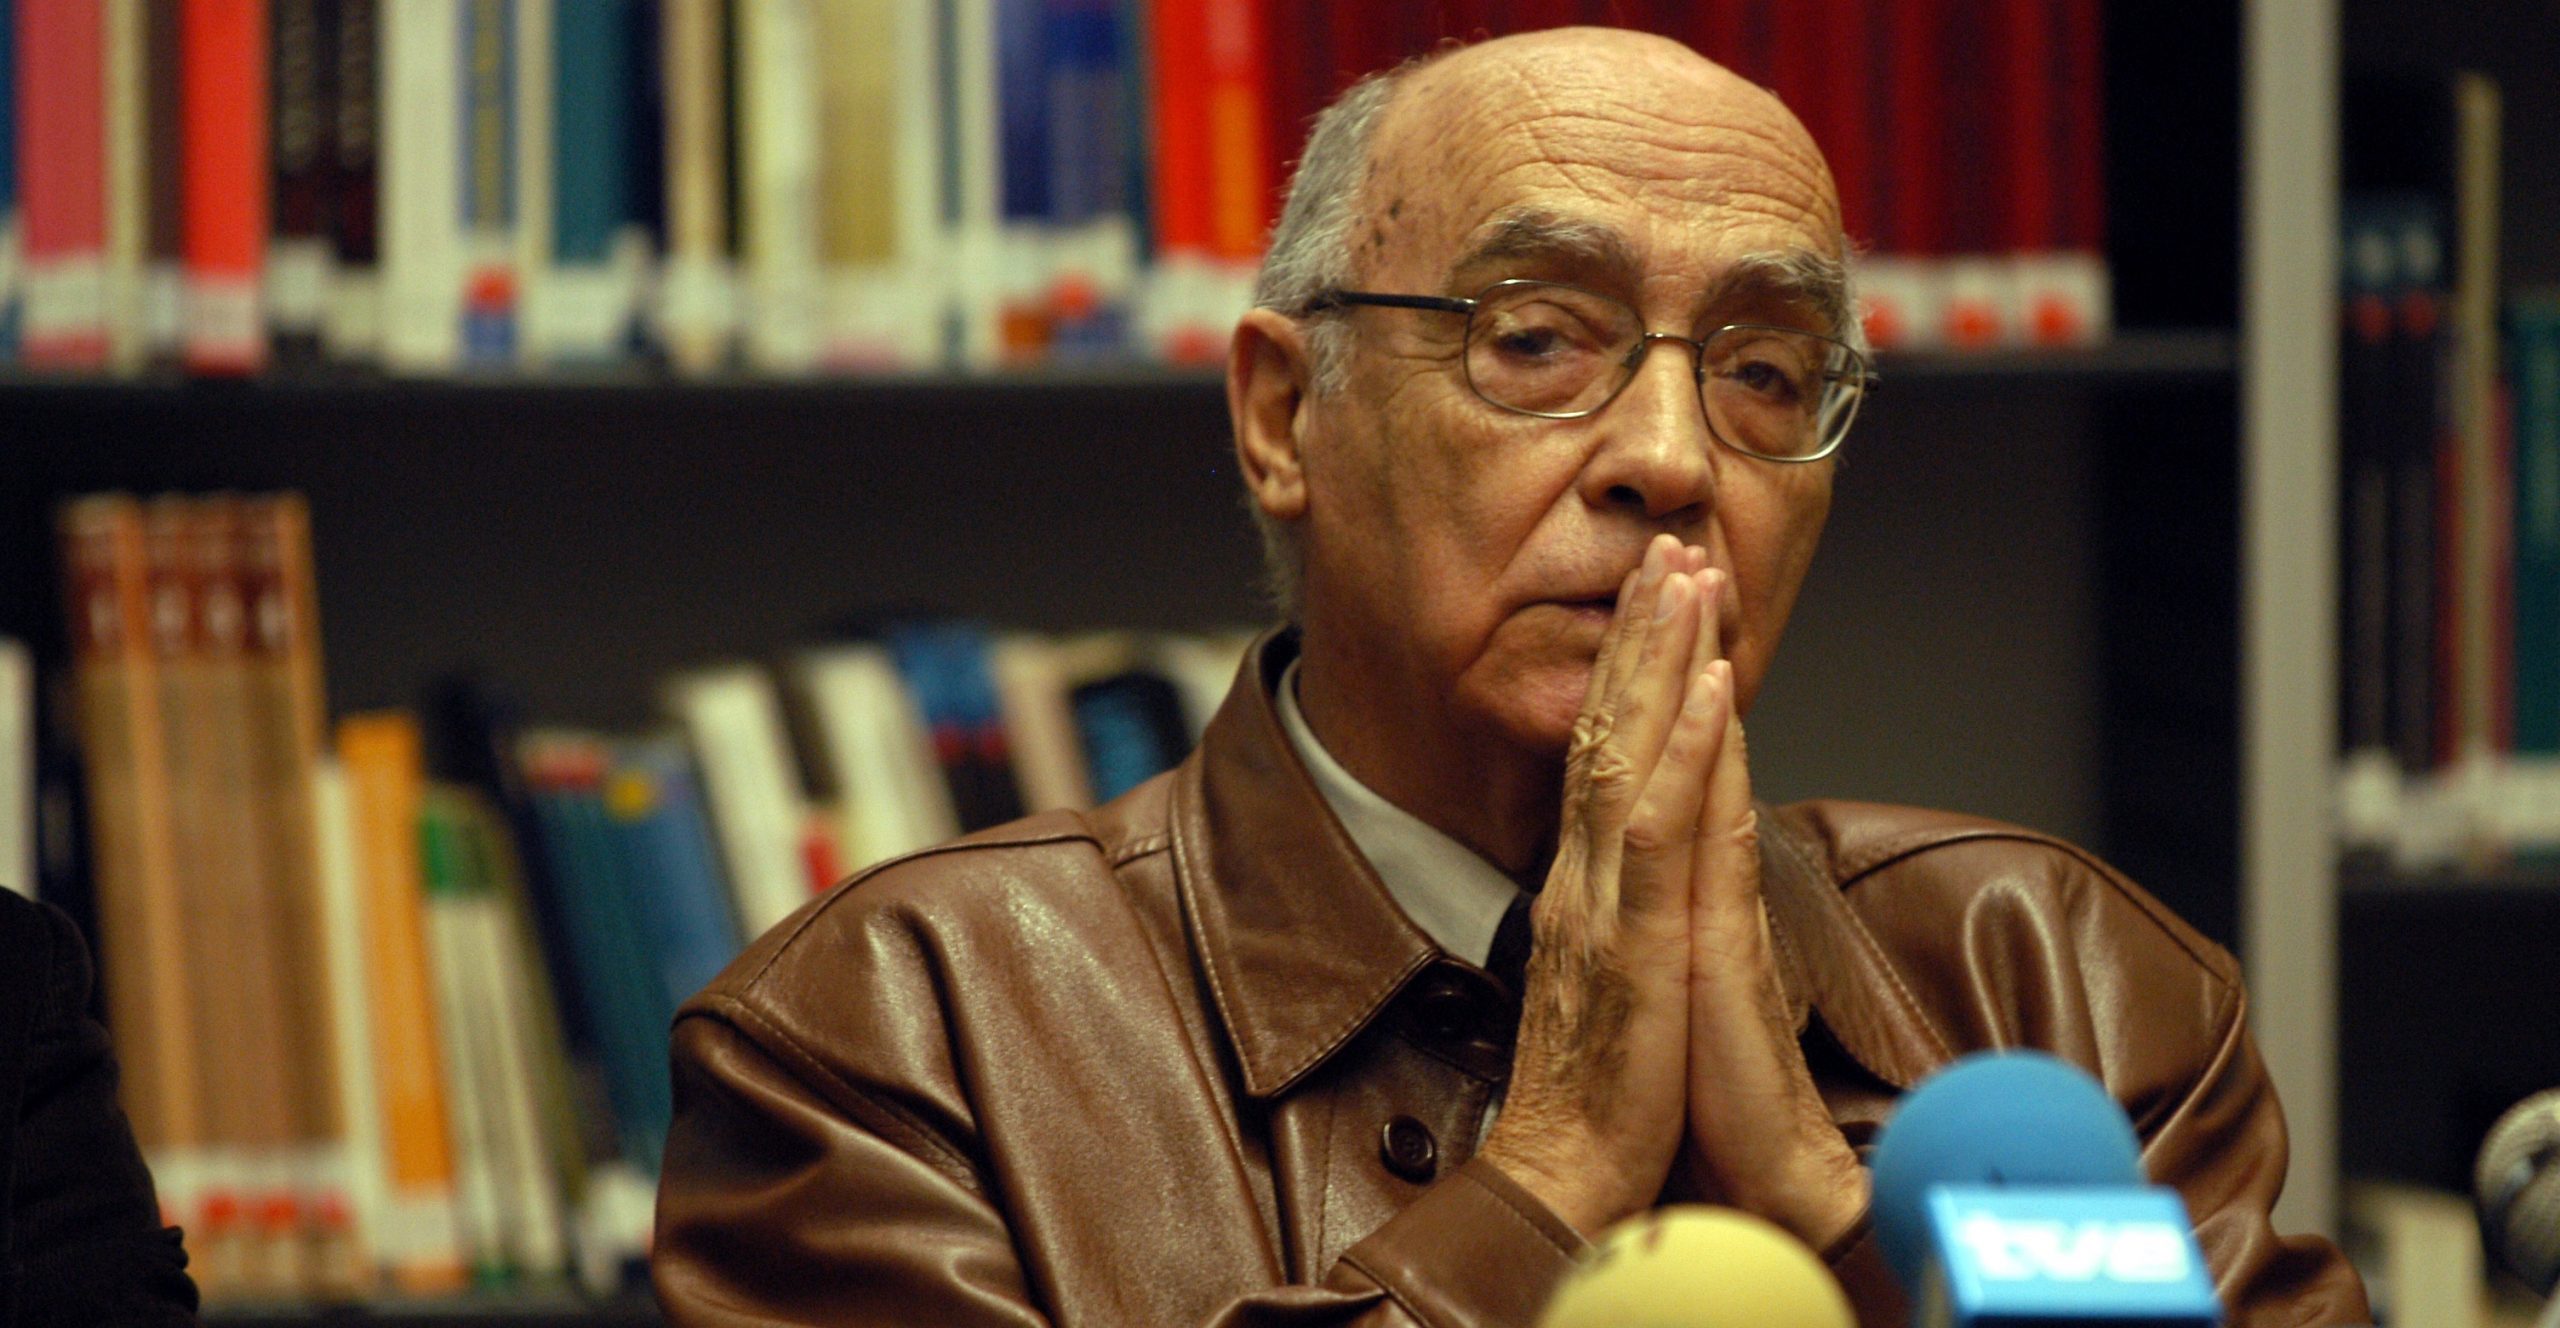 Festival pays tribute to the work of José Saramago 1